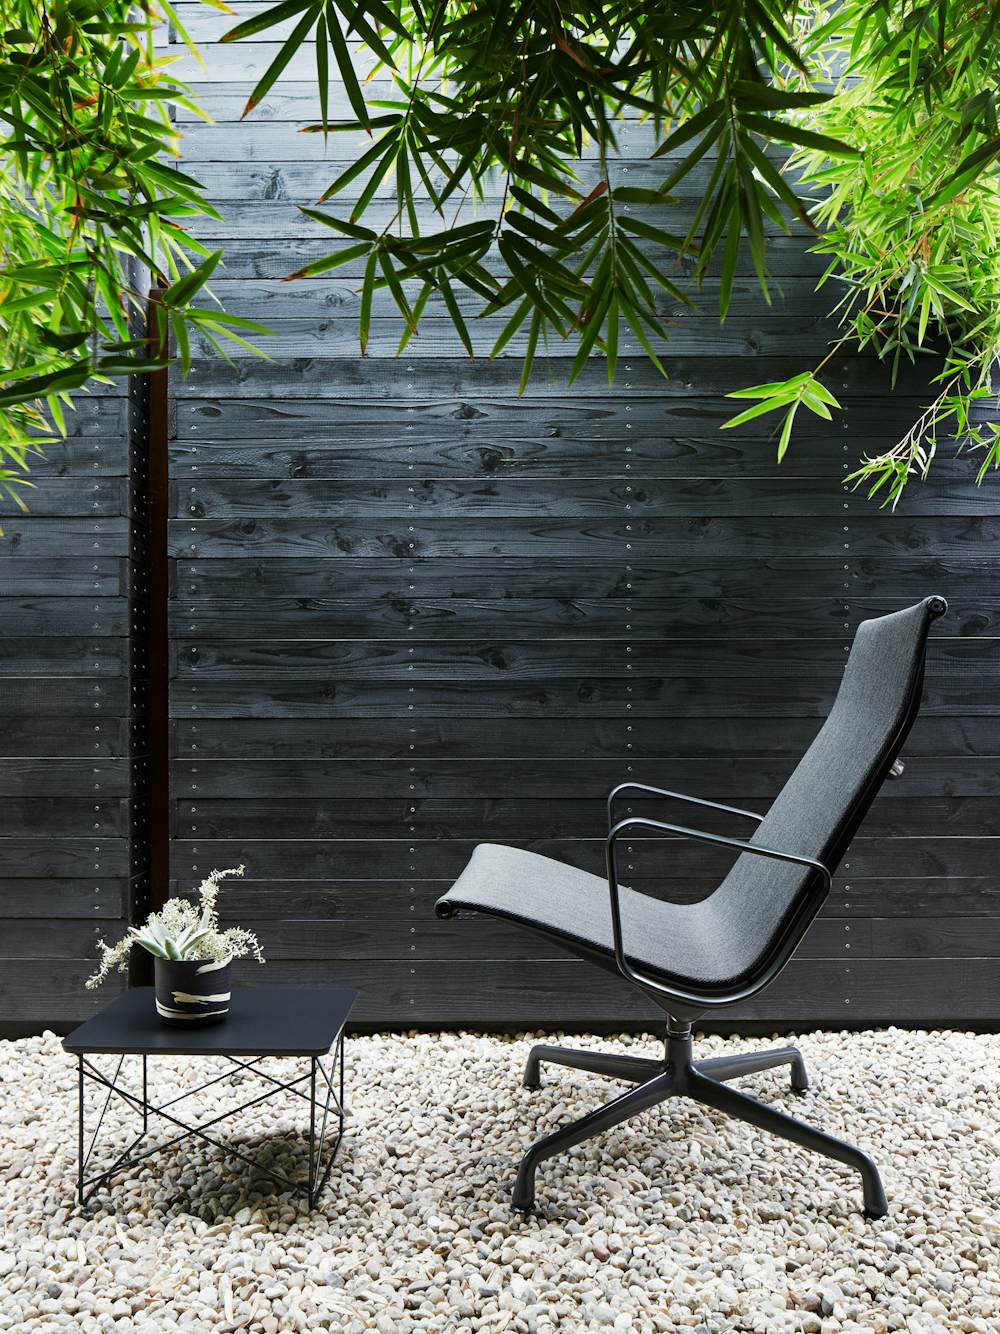 Eames Aluminum Group Chair outdoor